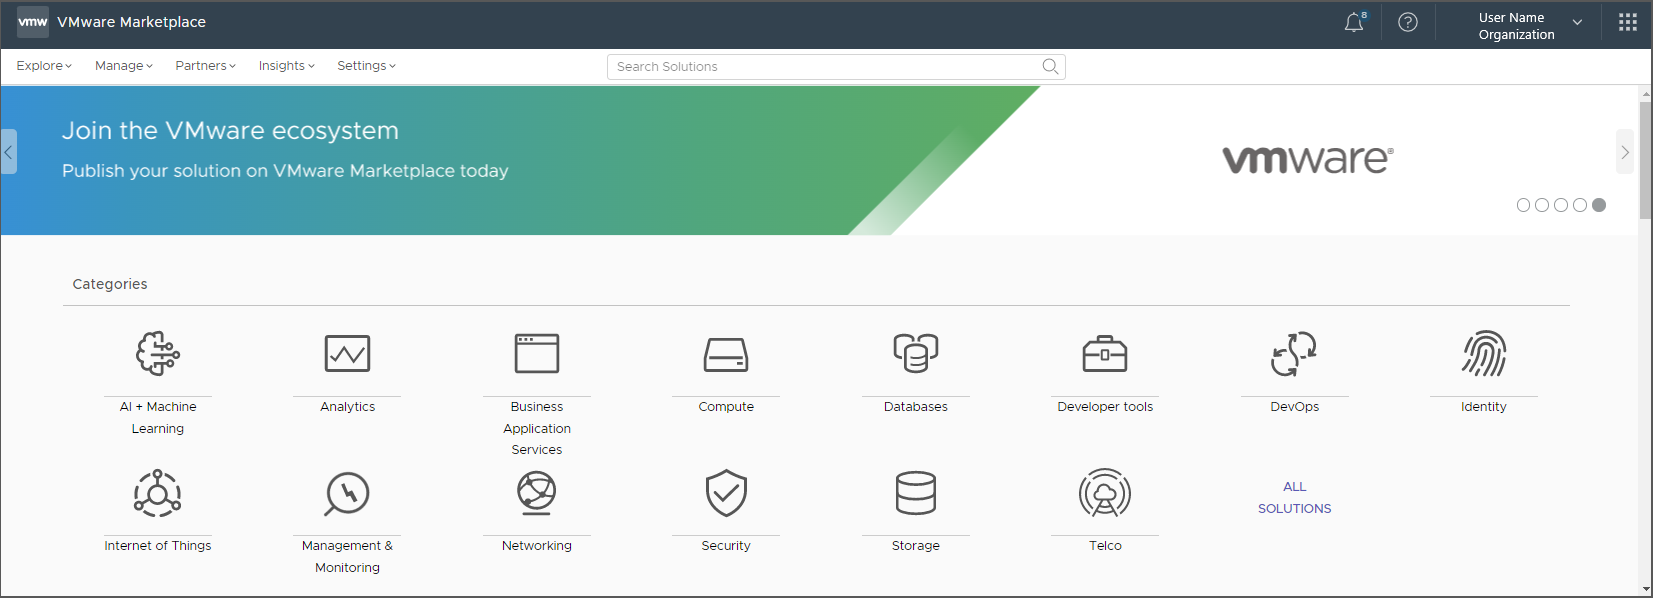 View of the VMware Marketplace Portal